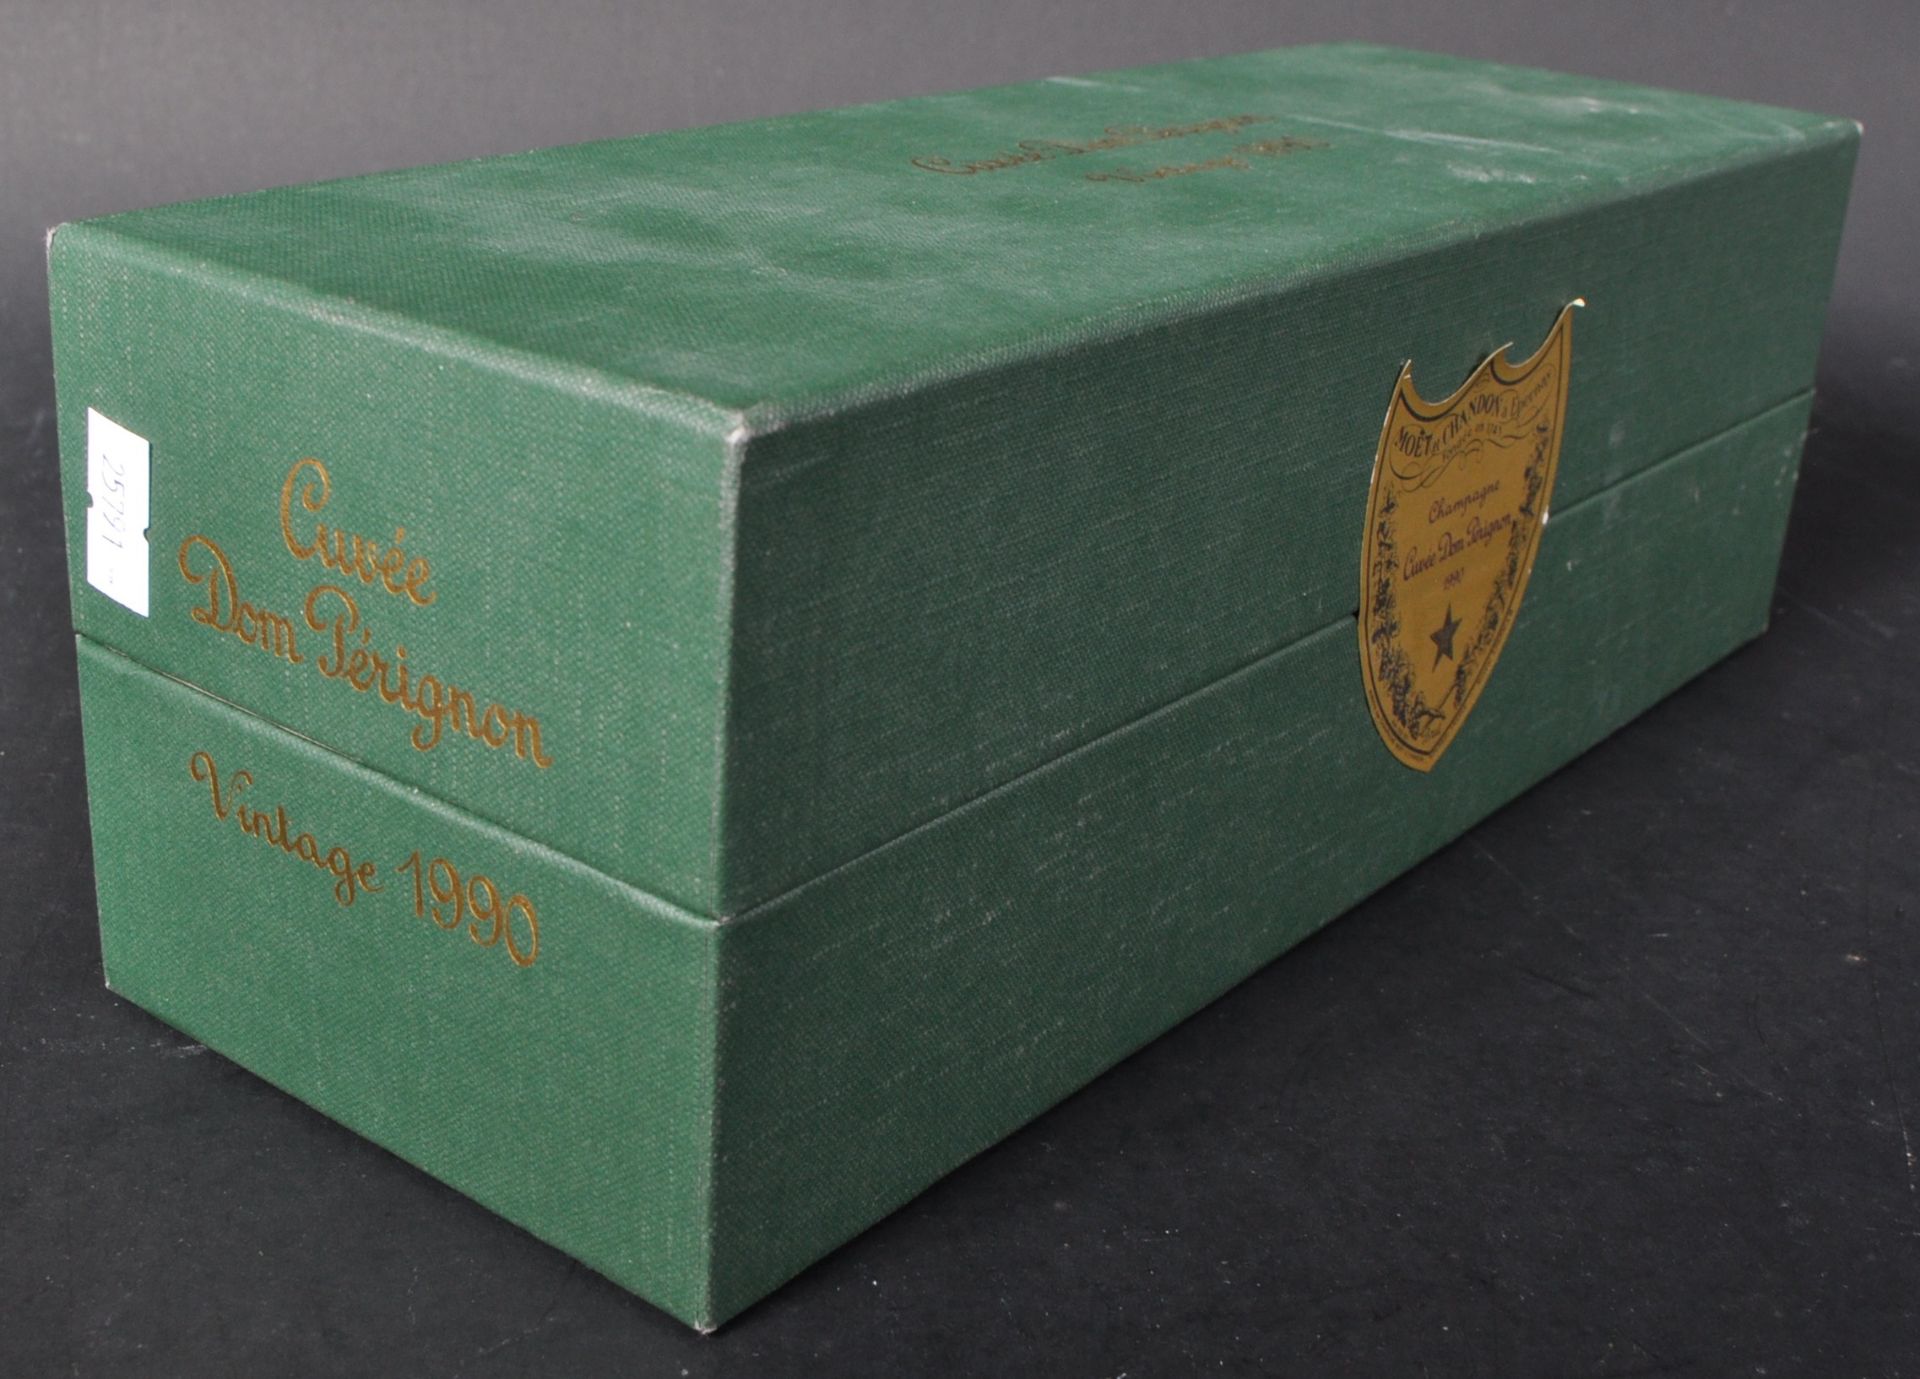 SEALED BOTTLE OF DOM PERIGNON CHAMPAGNE - Image 2 of 3